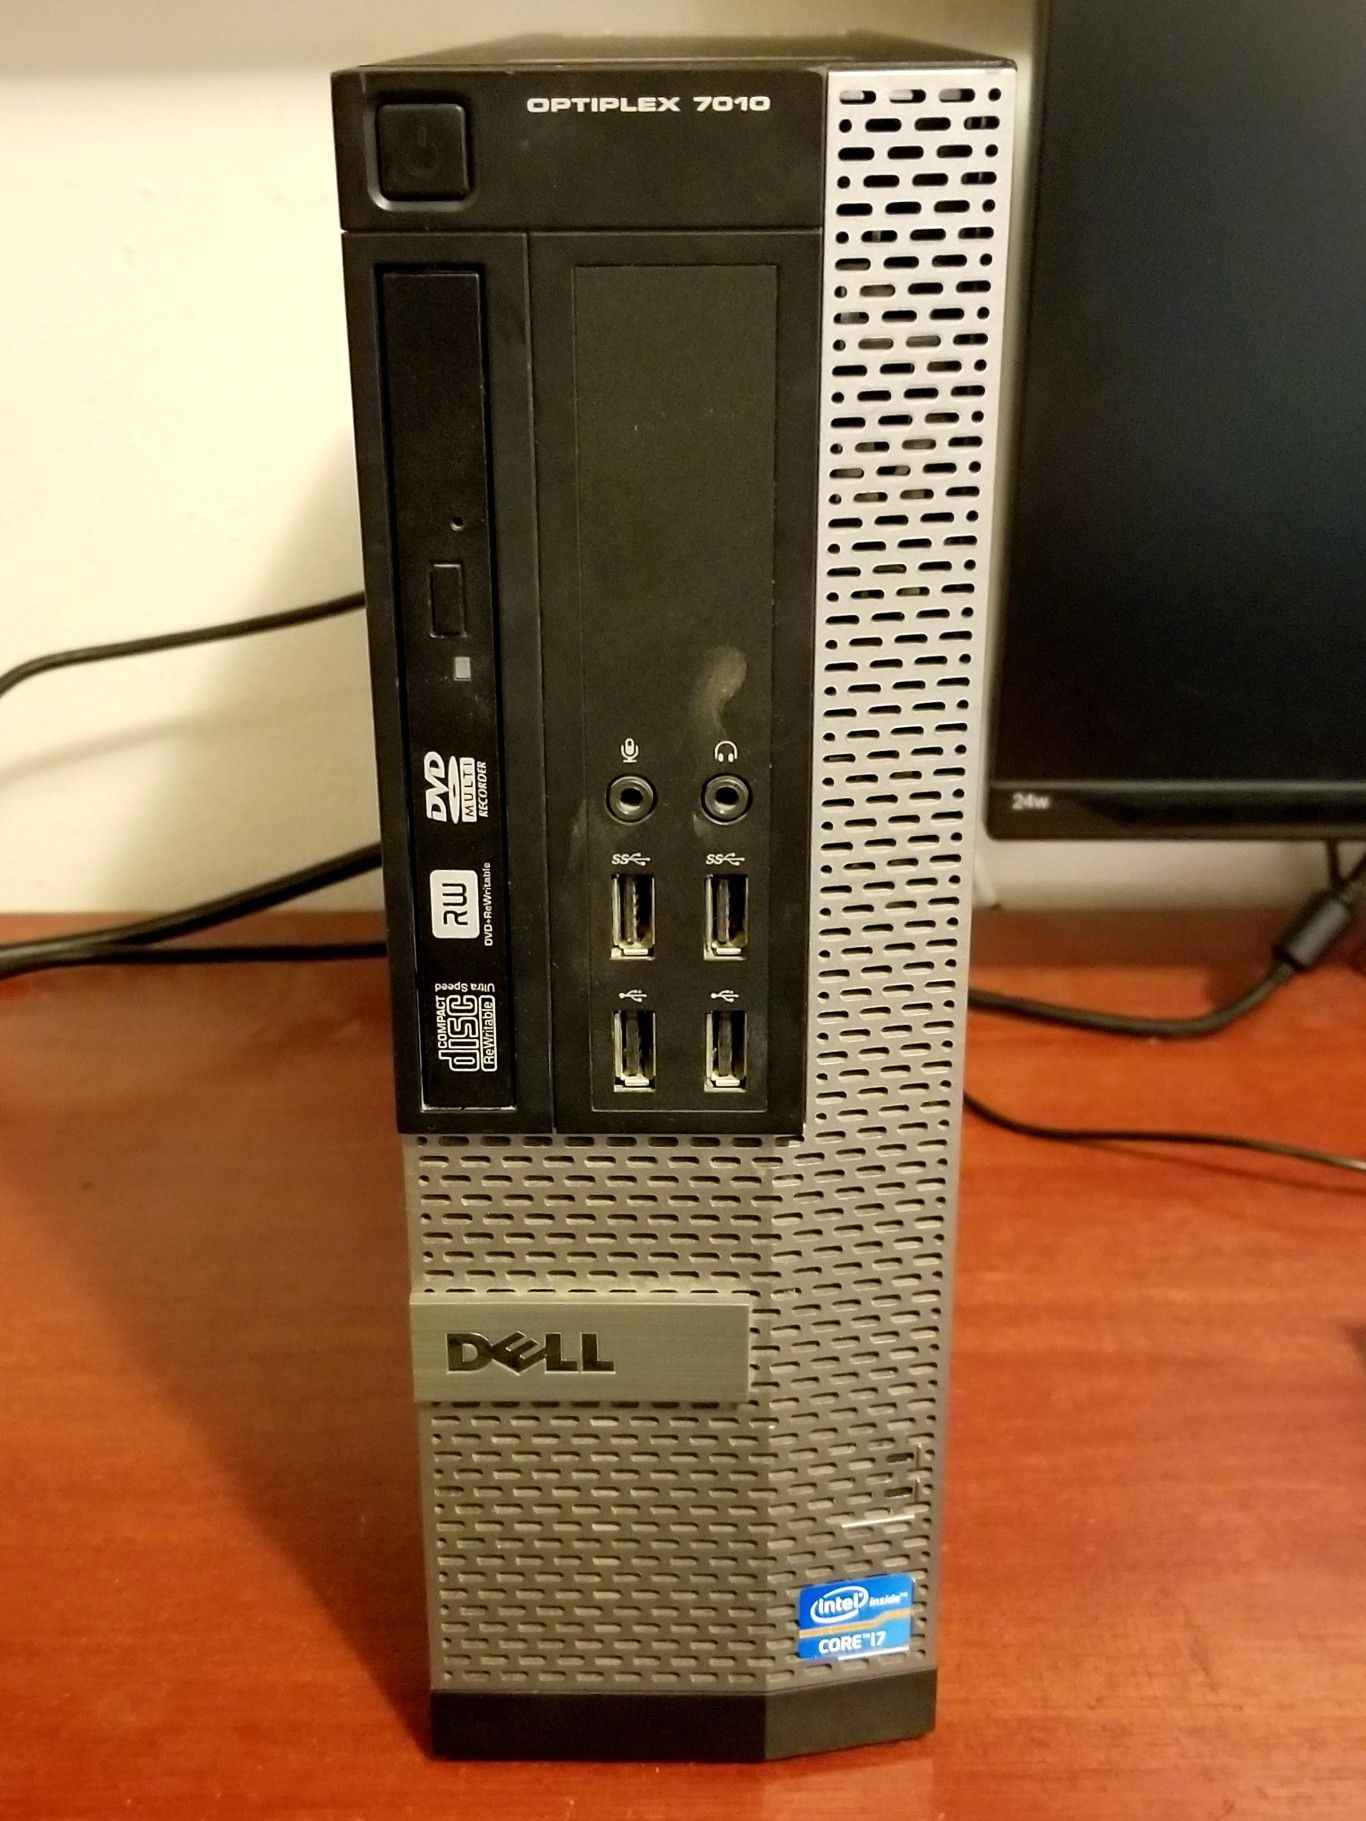 DELL OPTIPLEX 7010 SFF DESKTOP COMPUTER - I7, 256GB SSD, 16GB RAM,... PERFECT FOR WORK AT HOME OR STUDENT HOME SCHOOLING & DISTANCE LEARNING